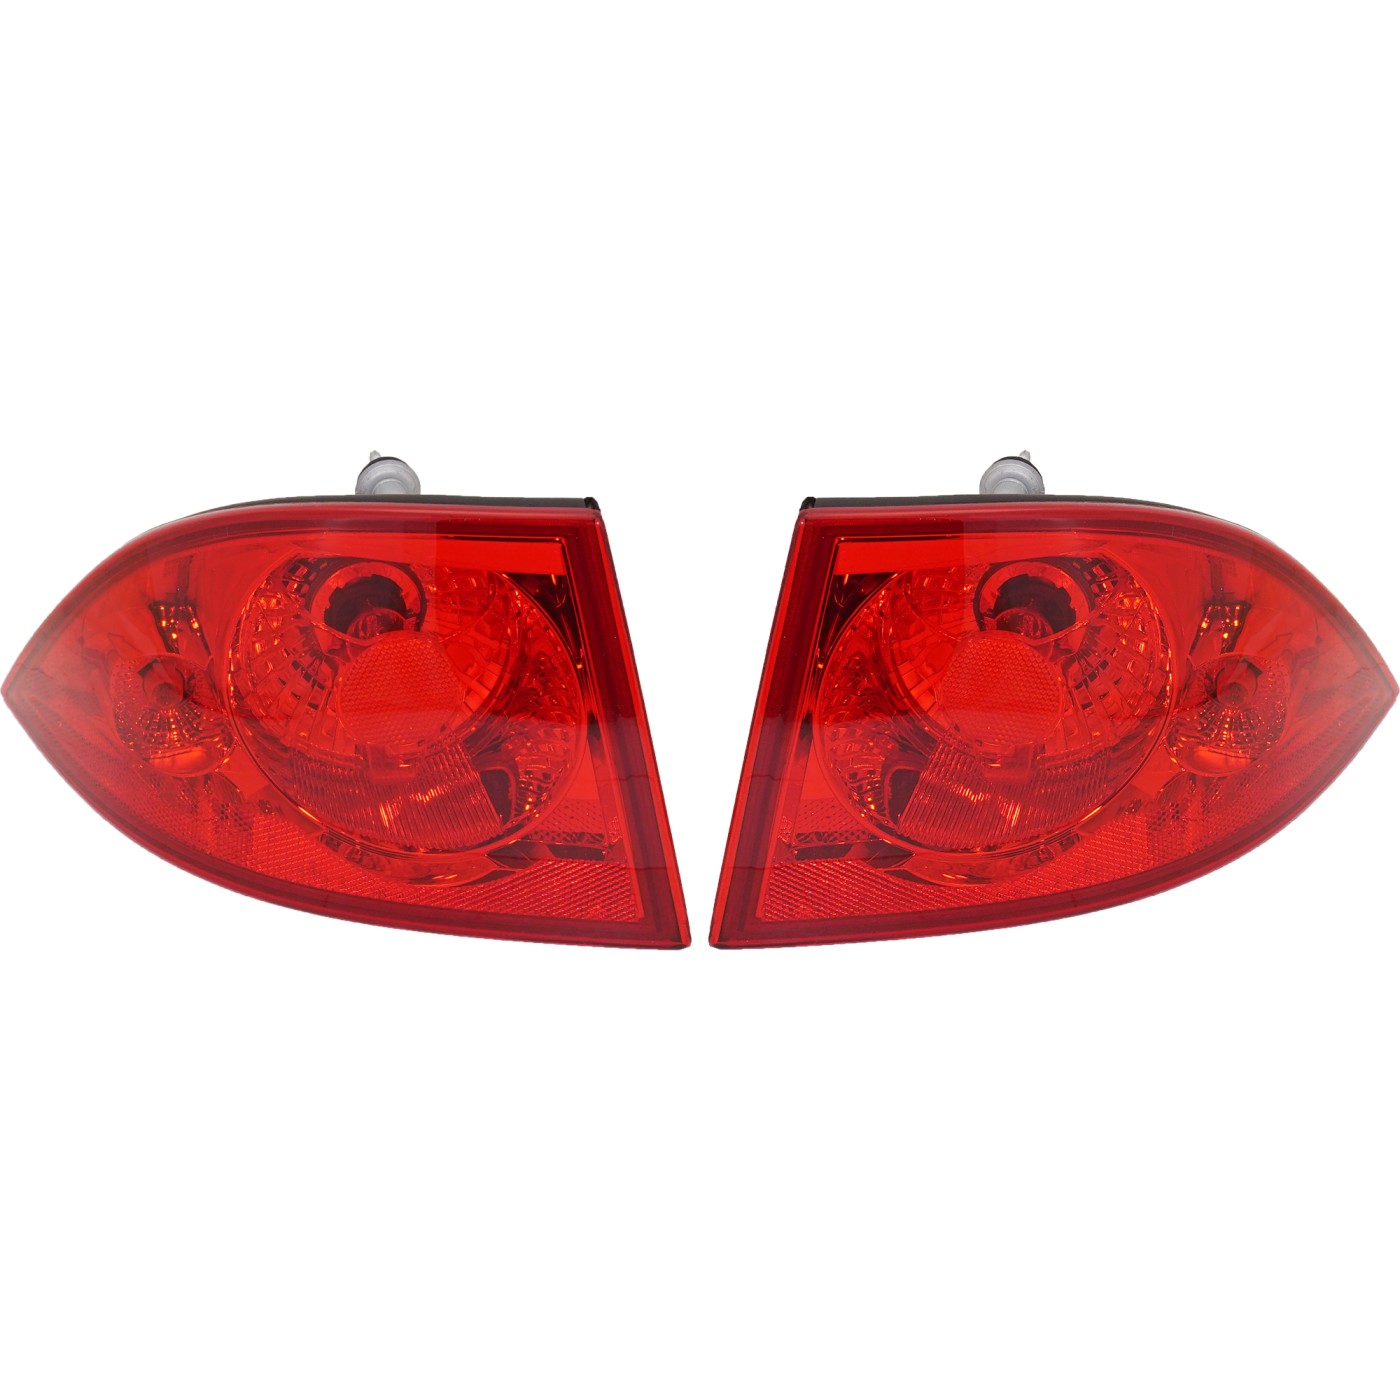 Set of 2 Tail Light For 2006-2008 Buick Lucerne CX LH & RH Outer w/ Bulb | eBay 2006 Buick Lucerne Tail Light Bulb Replacement